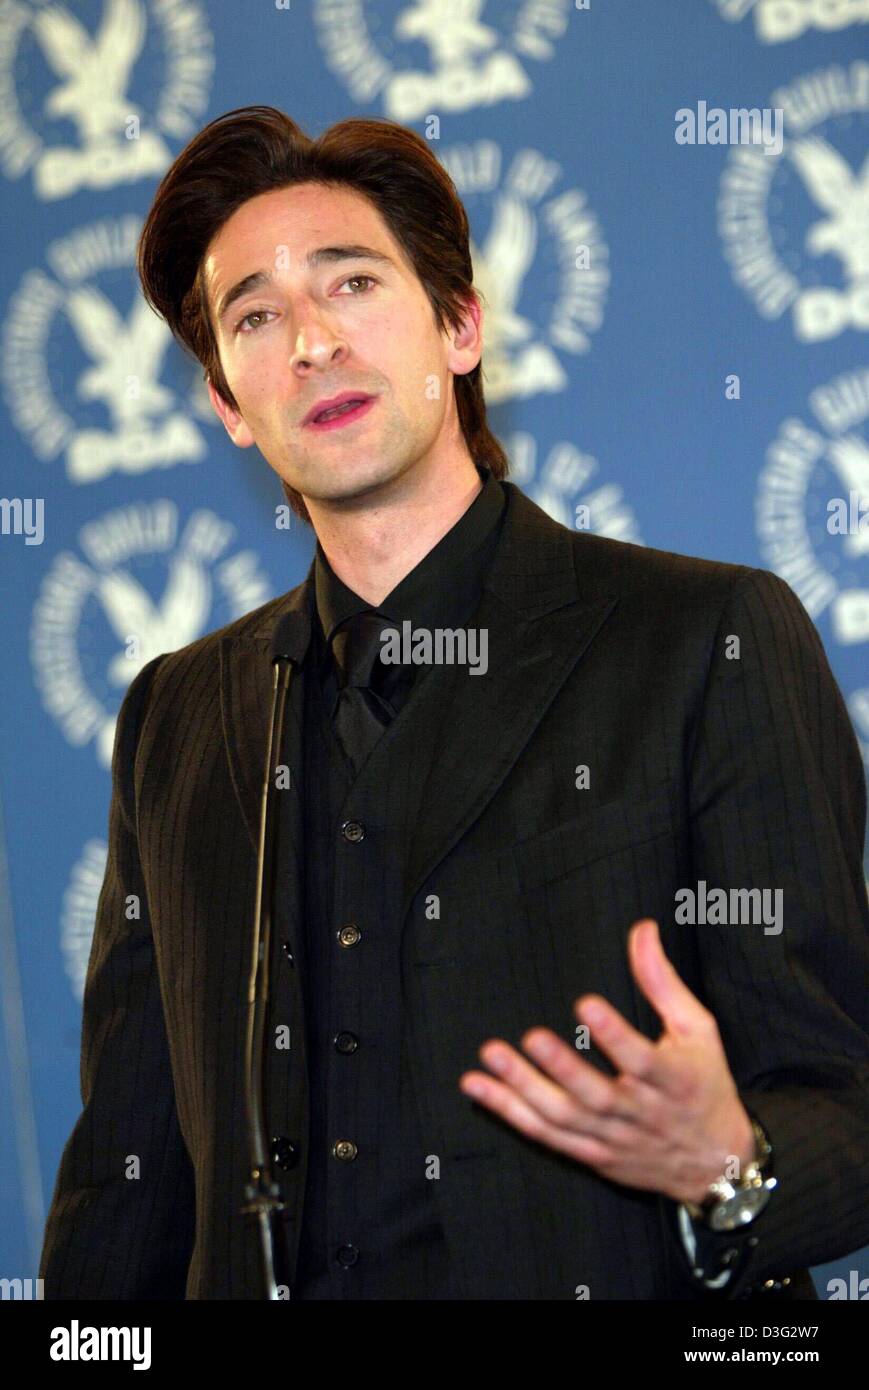 (dpa) - US actor Adrien Brody ('The Pianist'), one of the presenters of the DGA awards, poses backstage of the Directors Guild of America (DGA) awards show in Los Angeles, 1 March 2003. Stock Photo